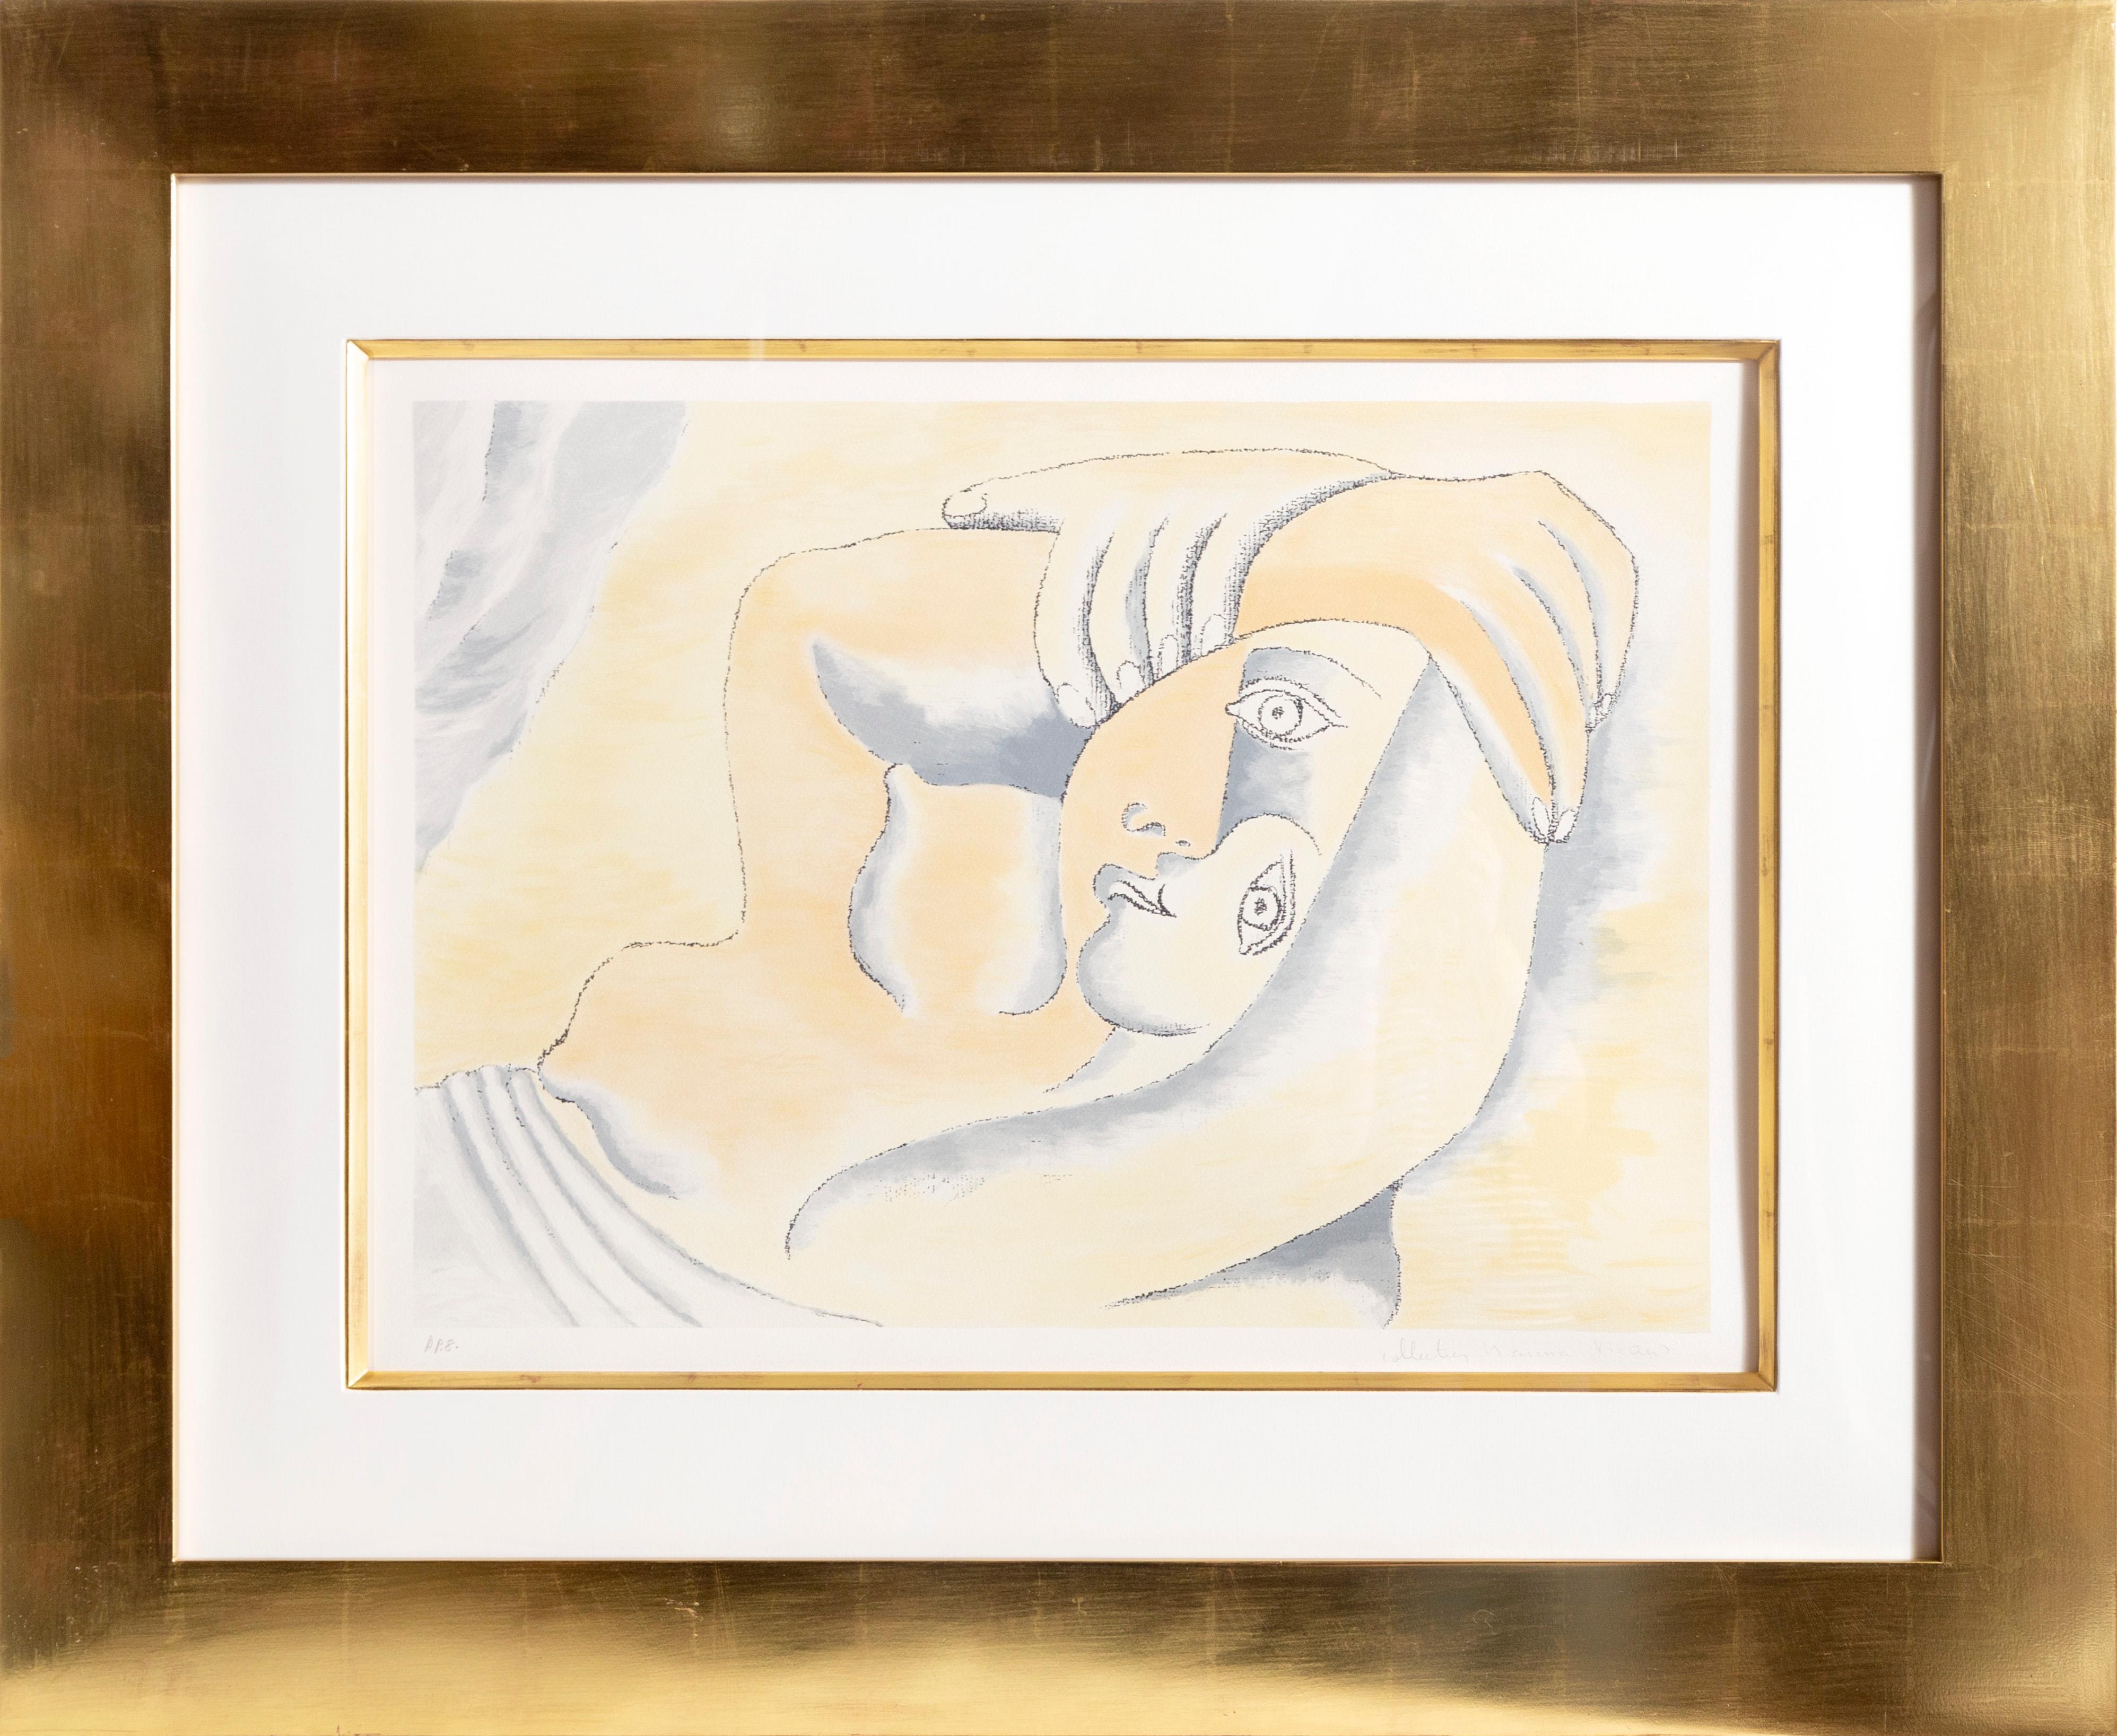 A lithograph from the Marina Picasso Estate Collection after the Pablo Picasso painting "Femme Couchee". The original painting was completed in 1929. In the 1970's after Picasso's death, Marina Picasso, his granddaughter, authorized the creation of